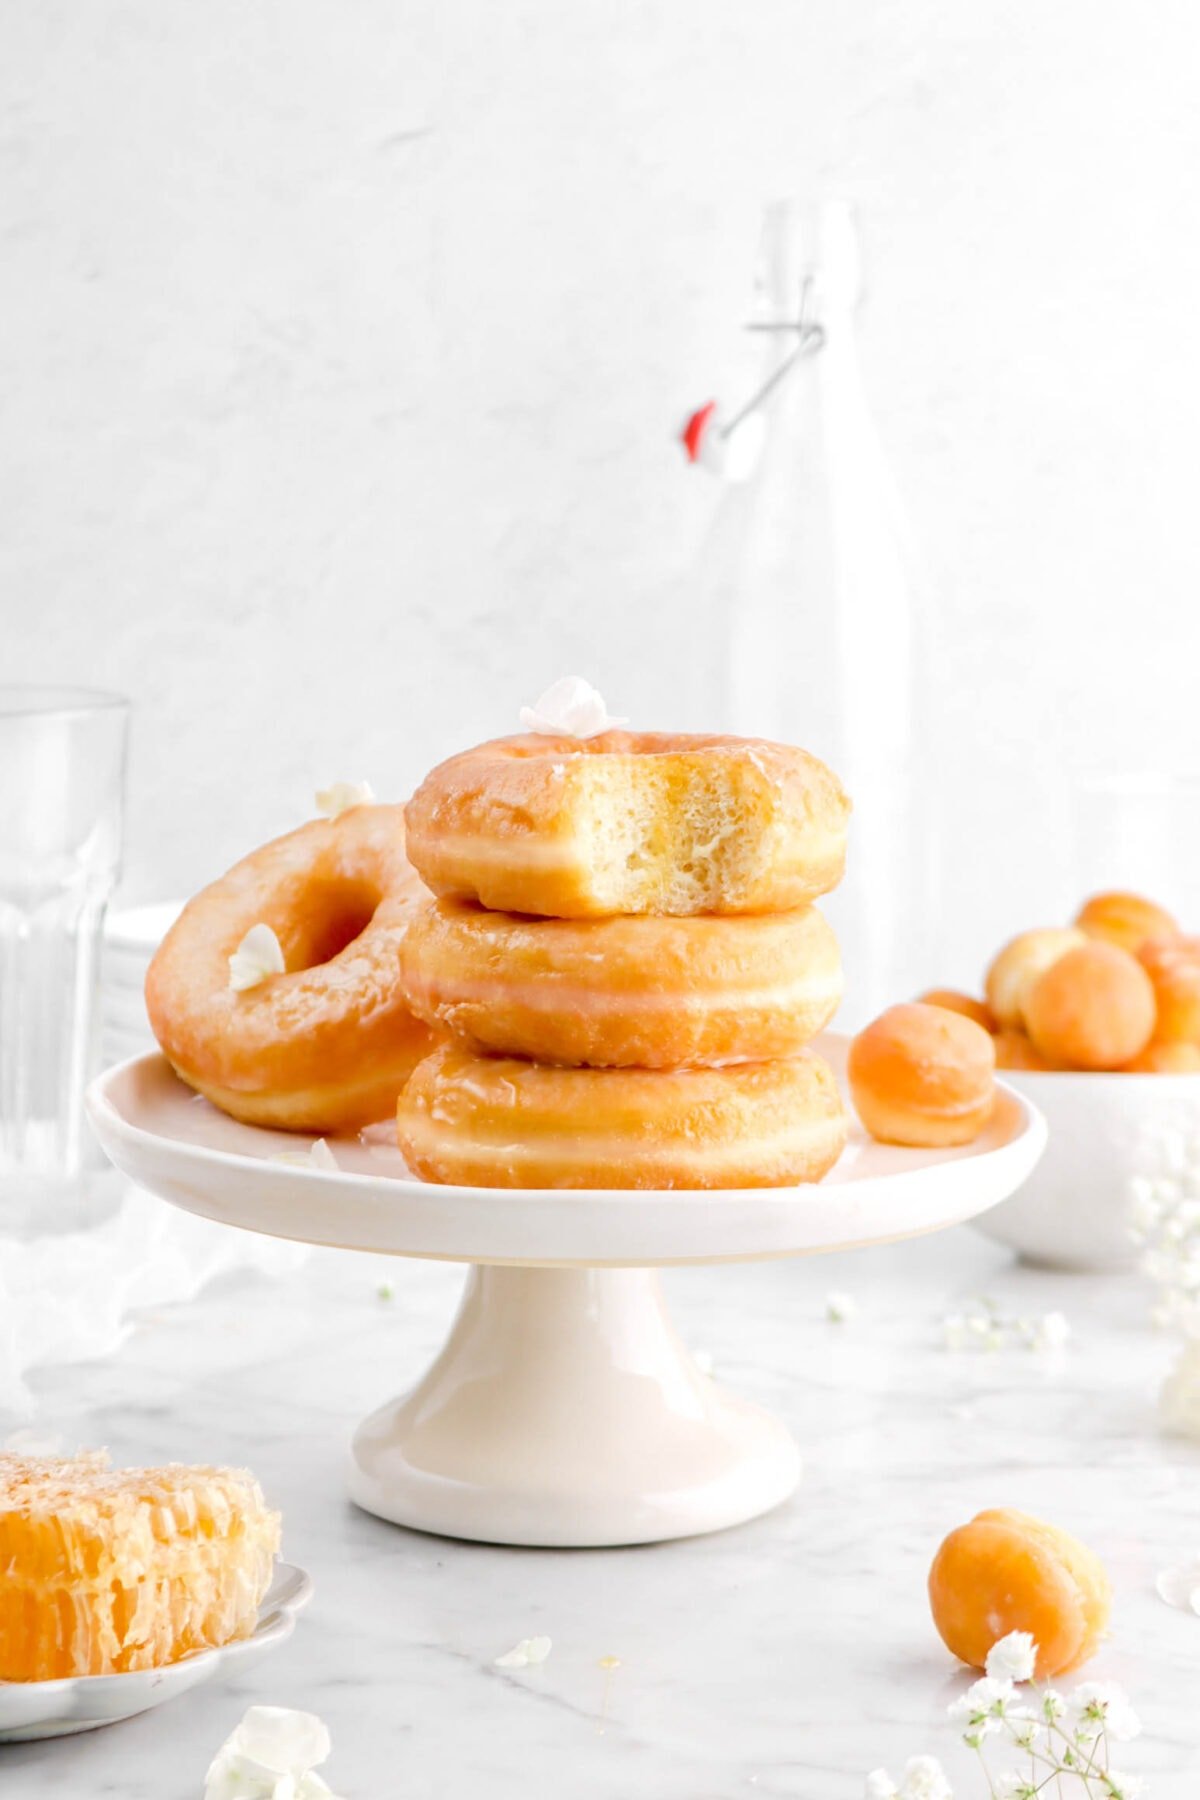 stack of three doughnuts on cake palte with bite missing out of top doughnut, another doughnut behind, and doughnut holes scattered around with white flowers